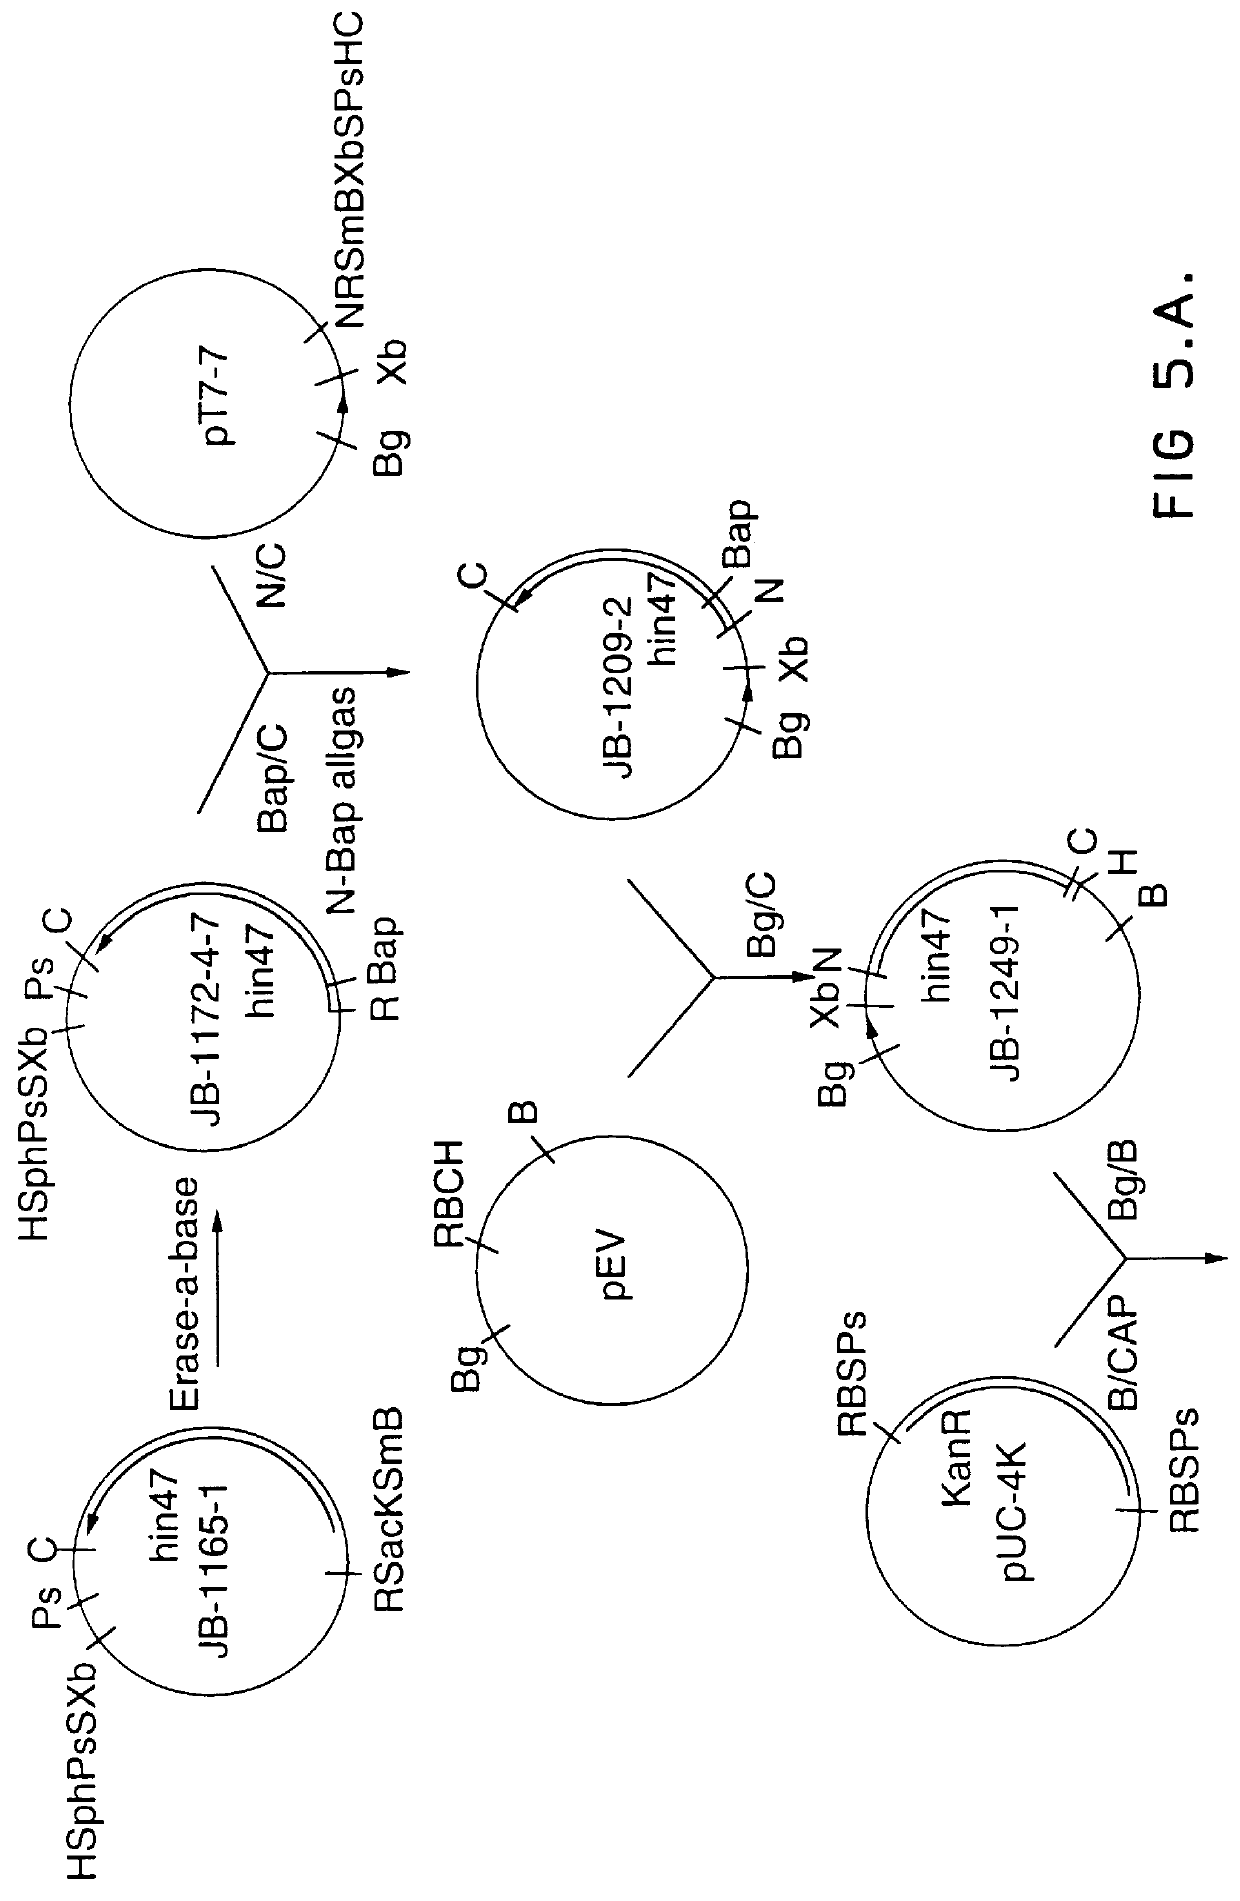 Analog of Haemophilus Hin47 with reduced protease activity